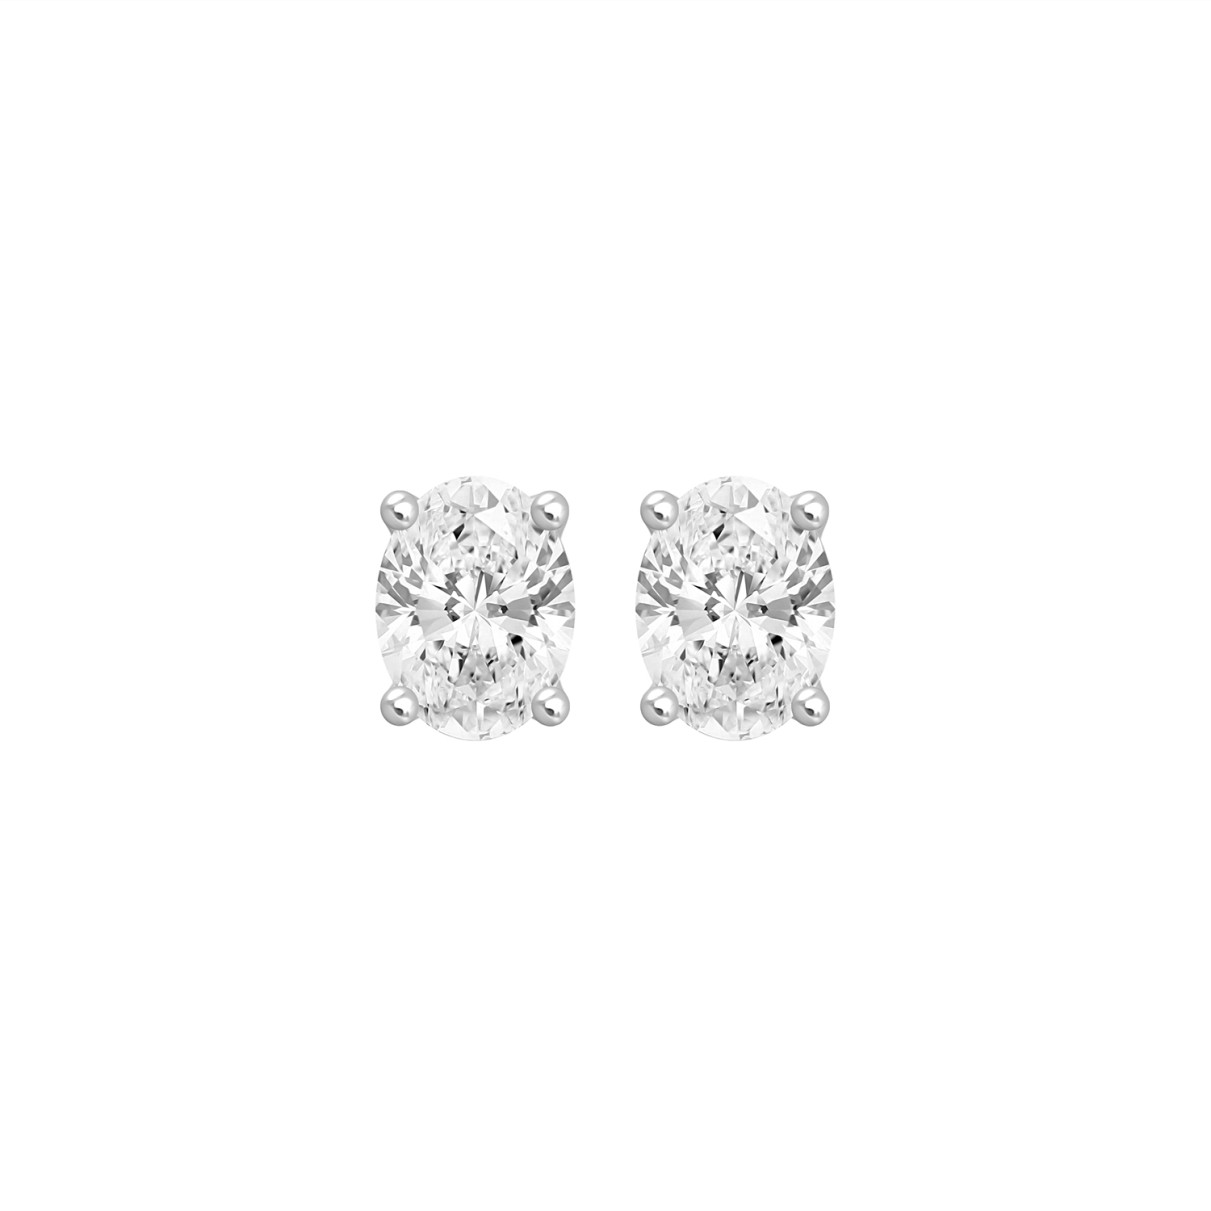 LADIES SOLITAIRE EARRINGS 1 1/2CT OVAL DIAMOND 14K WHITE GOLD